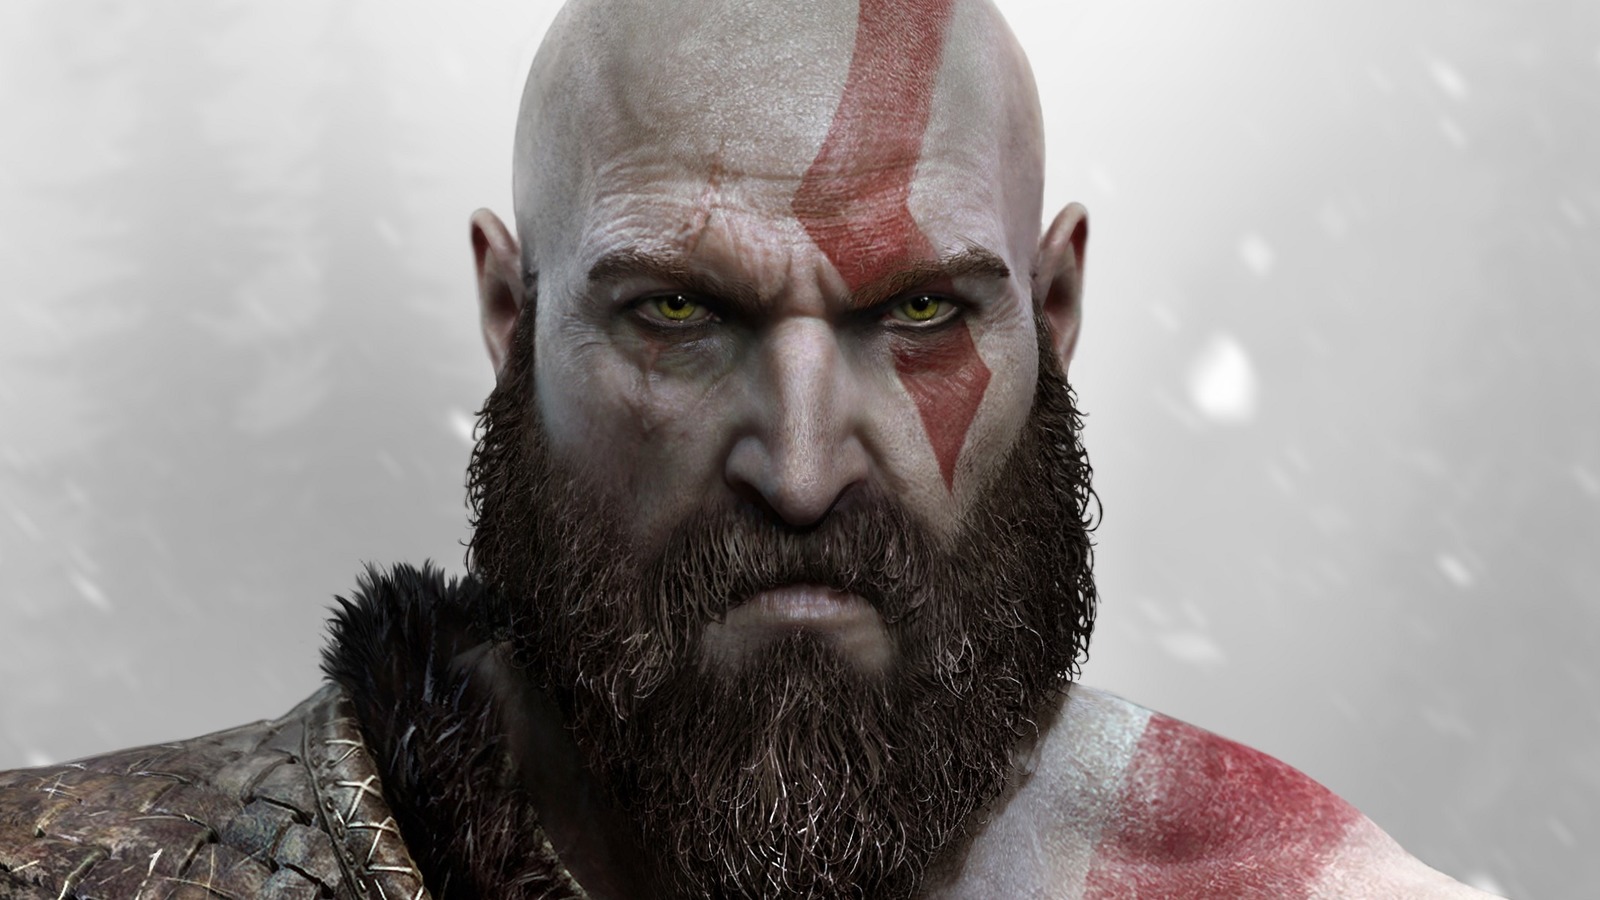 Every God of War: Ragnarok Character's History and Powers, Explained